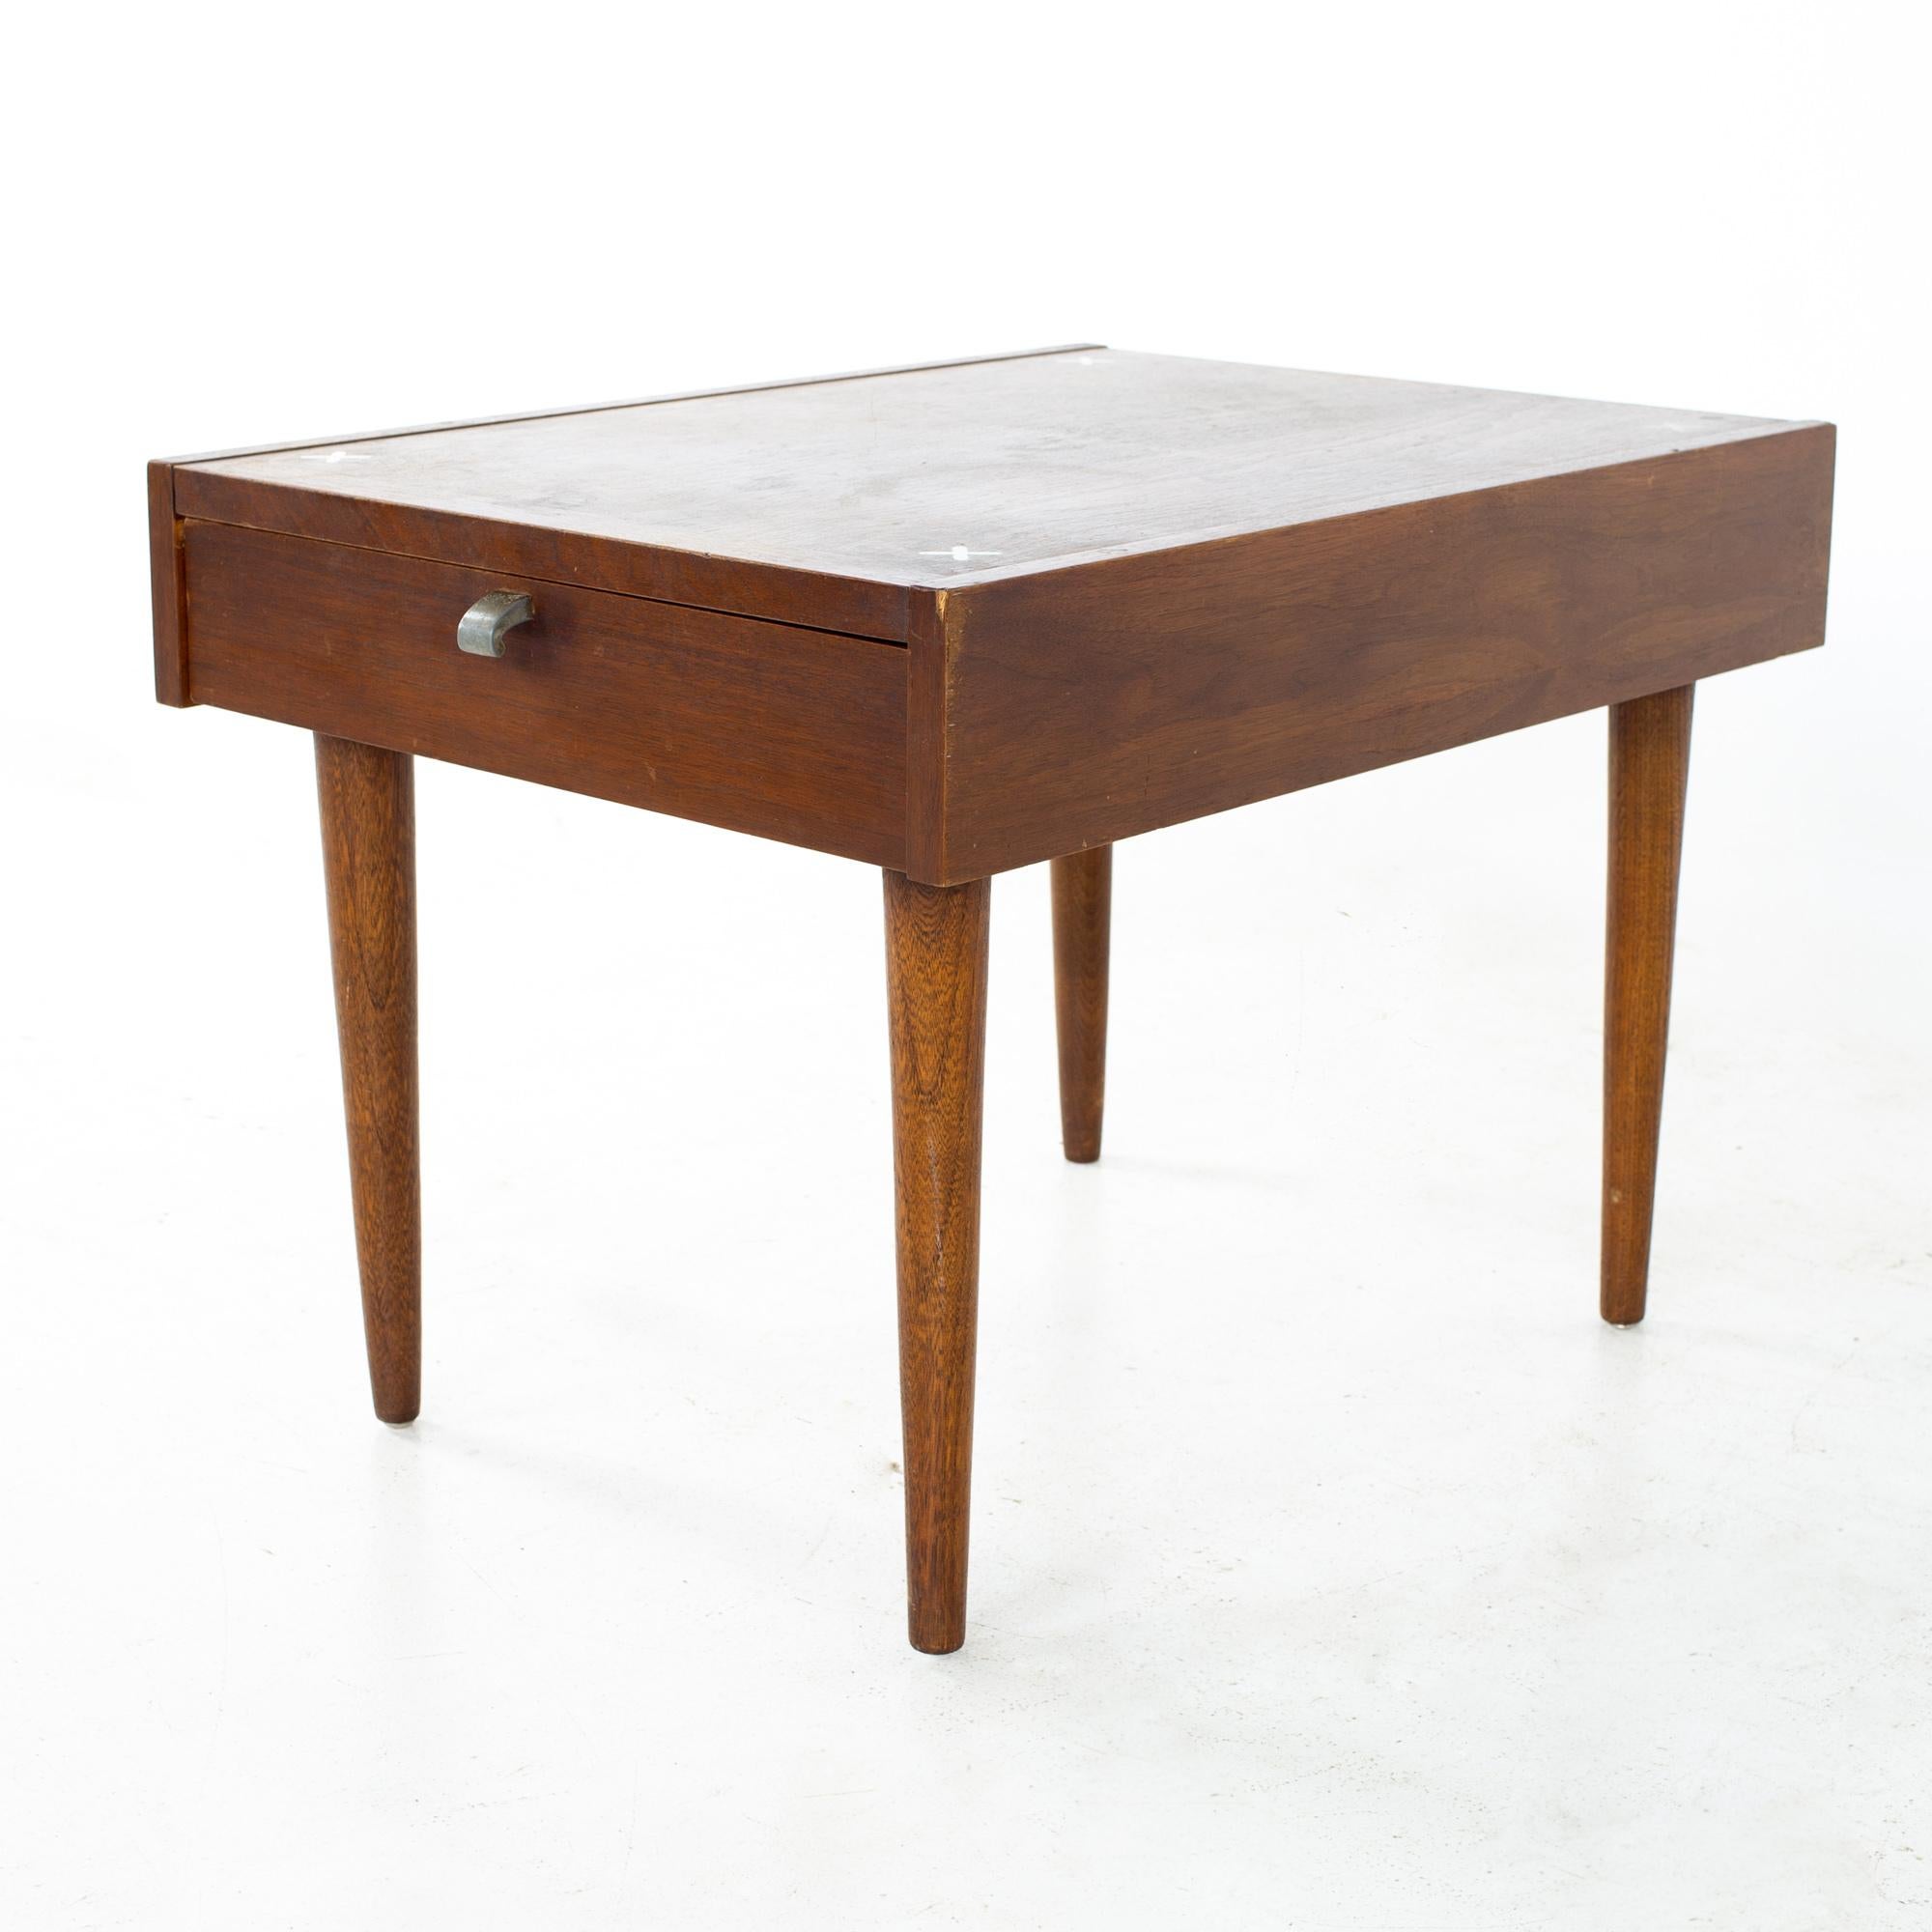 Merton Gershun for American of Martinsville mid century X inlaid walnut side end table
End table measures: 20 wide x 27 deep x 19 inches high

All pieces of furniture can be had in what we call restored vintage condition. That means the piece is